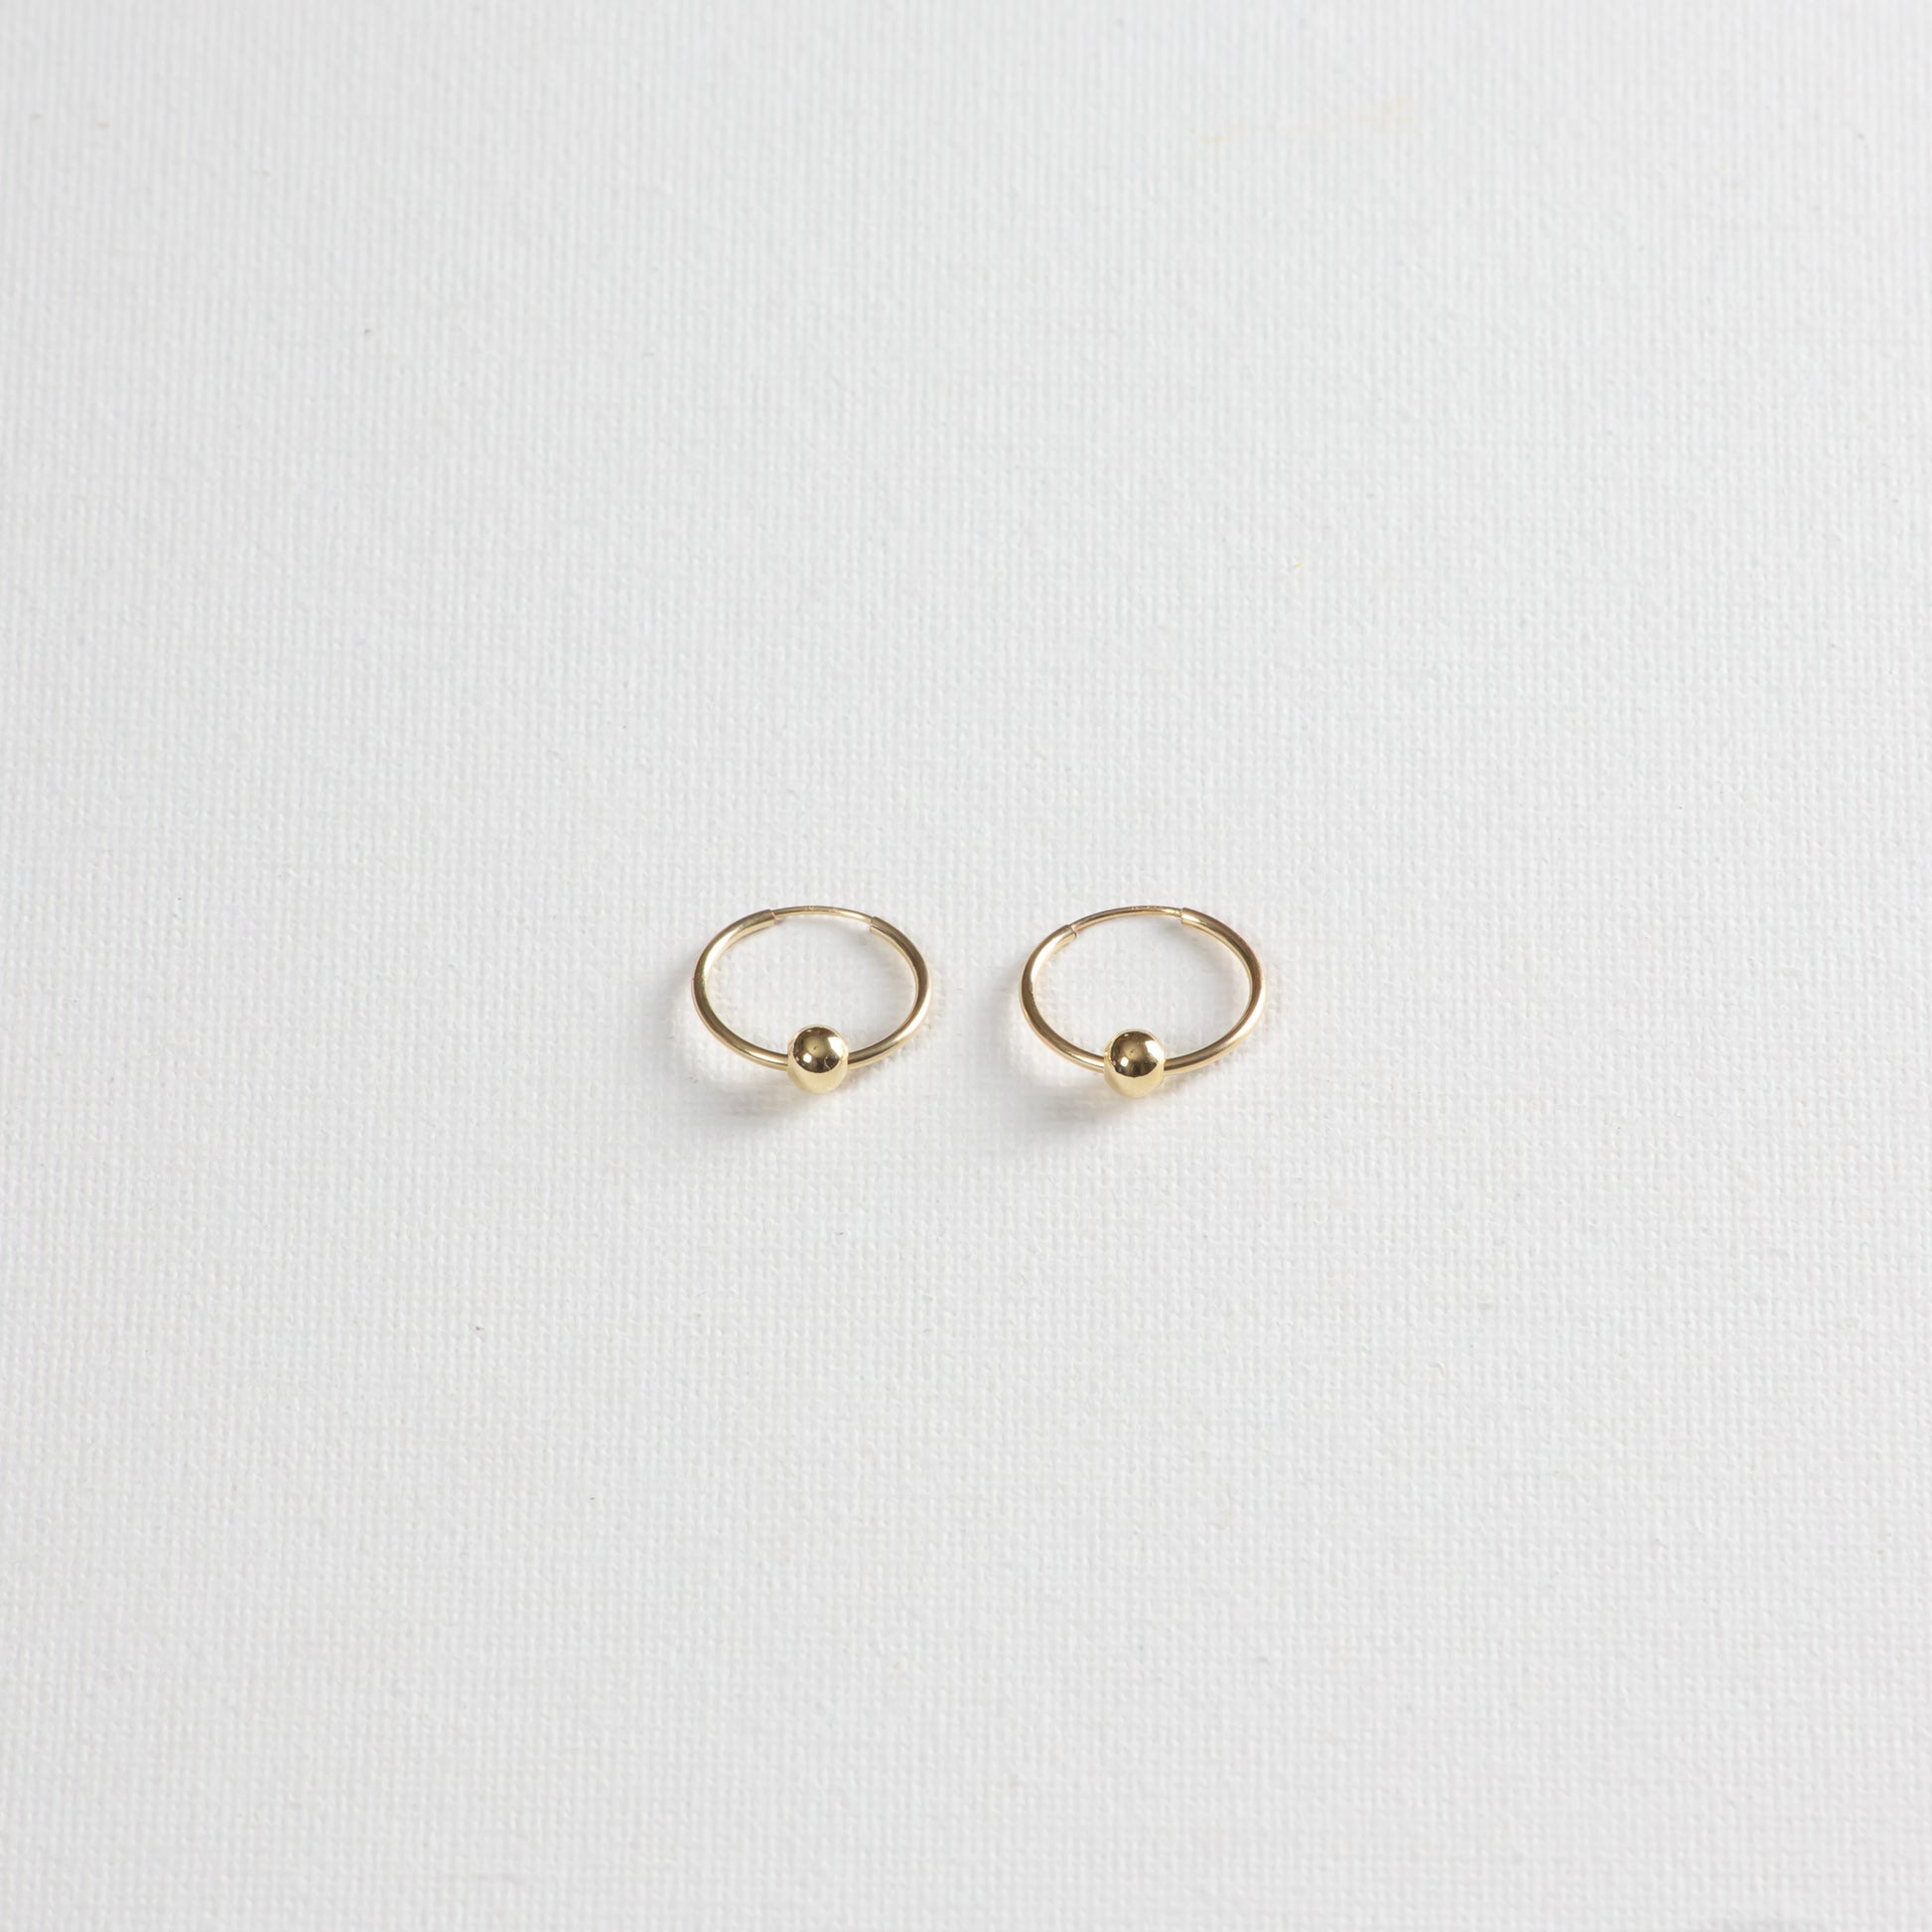 Thin gold hoops with seamless closure. The earrings feature delicate 4mm circle looped through the earring. The earrings are photographed on a white background.